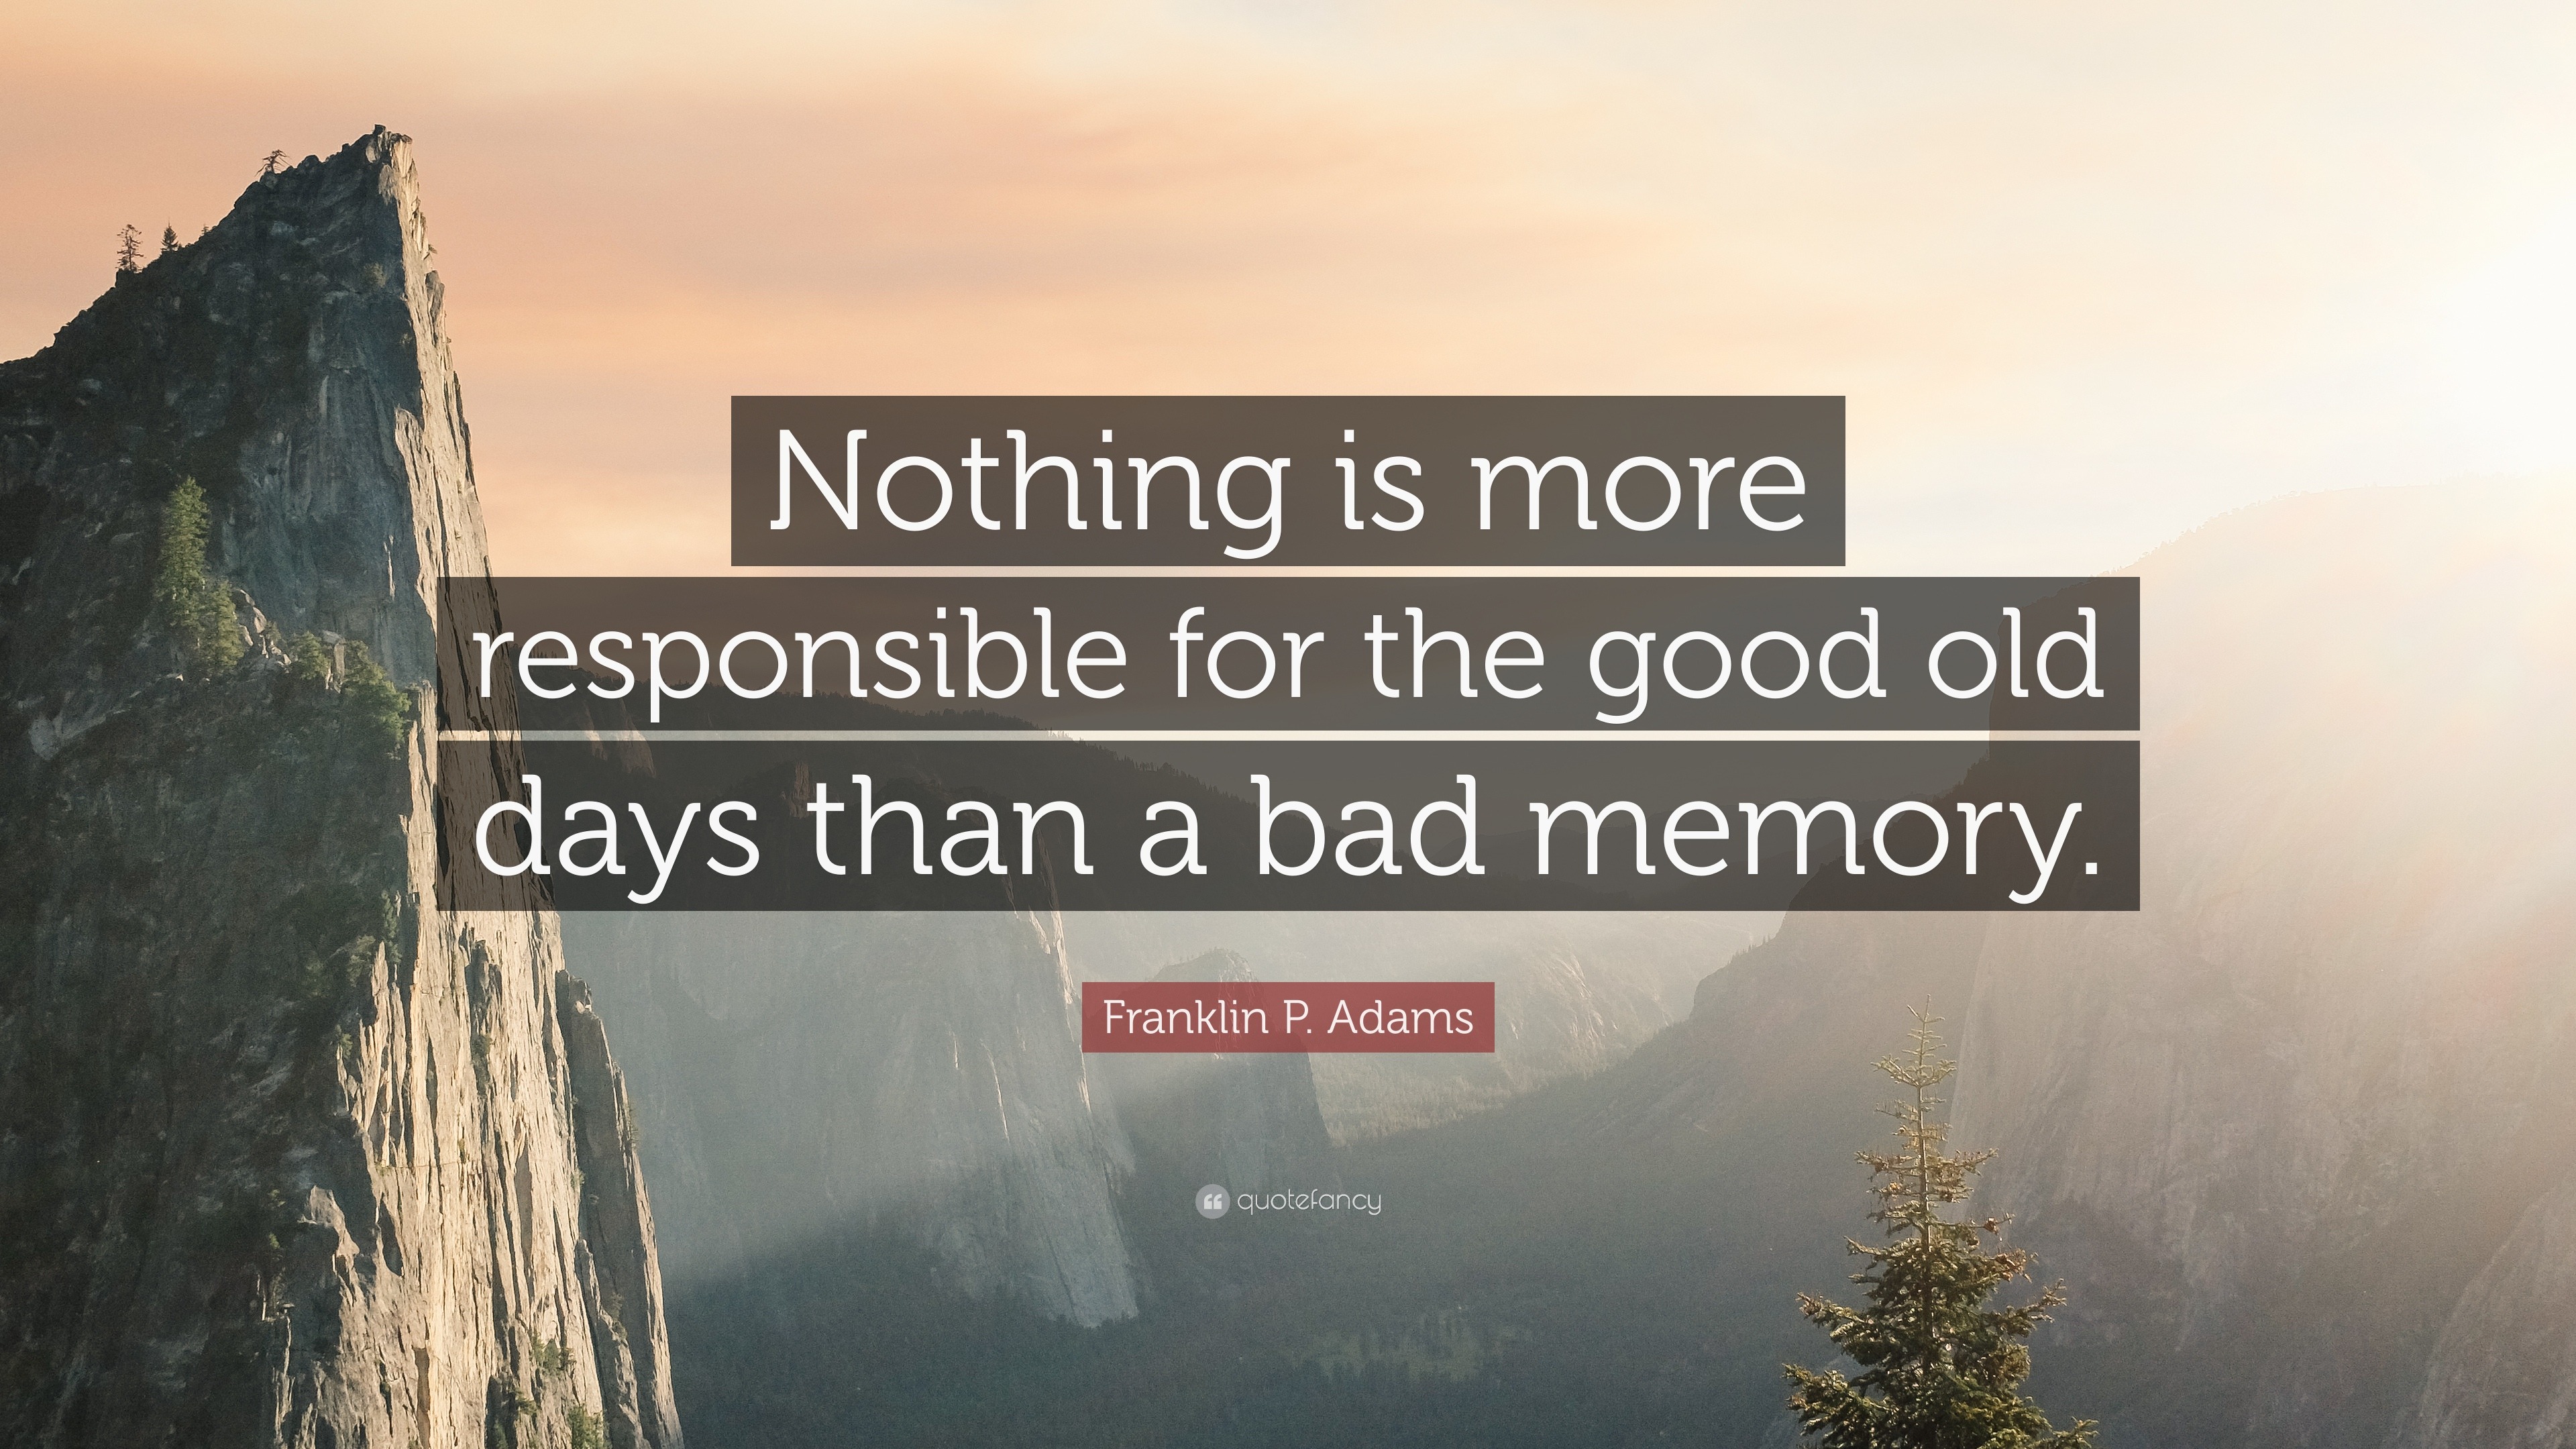 Franklin P. Adams Quote: “Nothing is more responsible for the good old ...